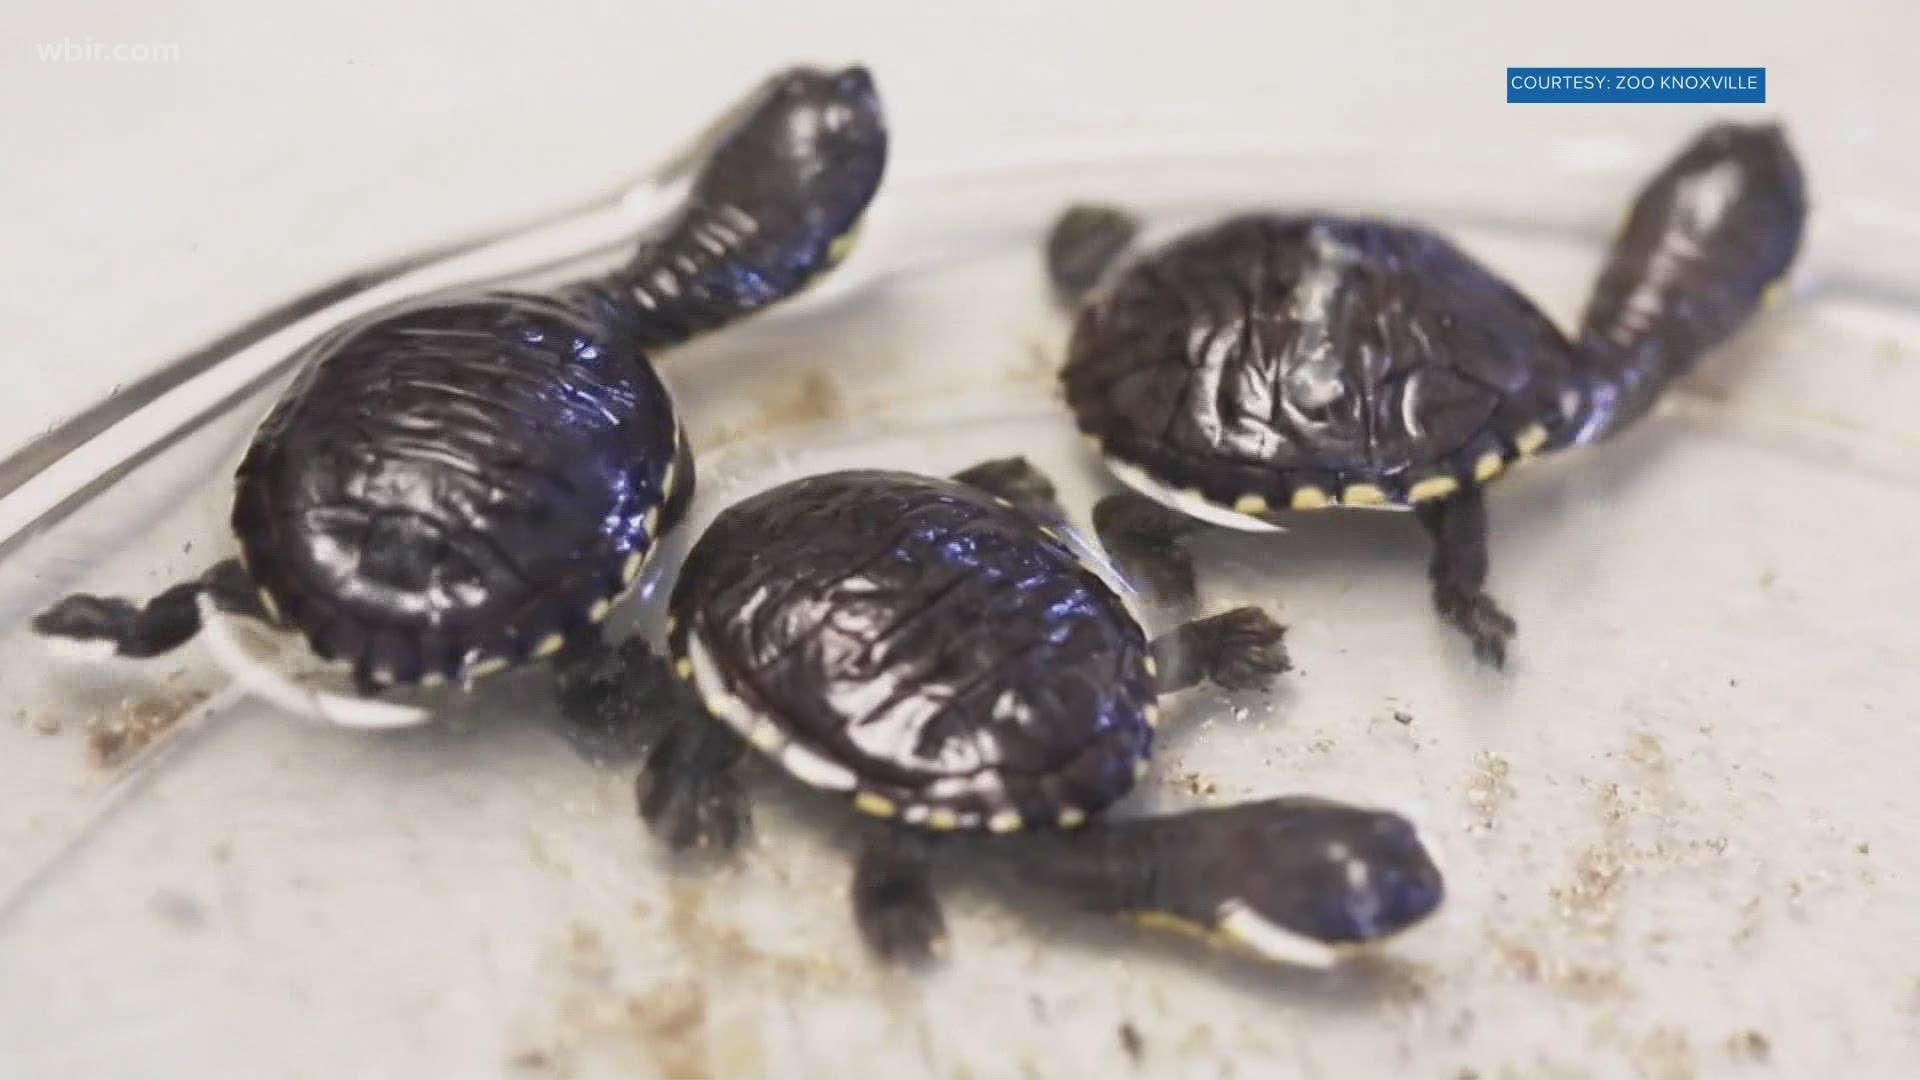 The three turtles hatched in mid-April.